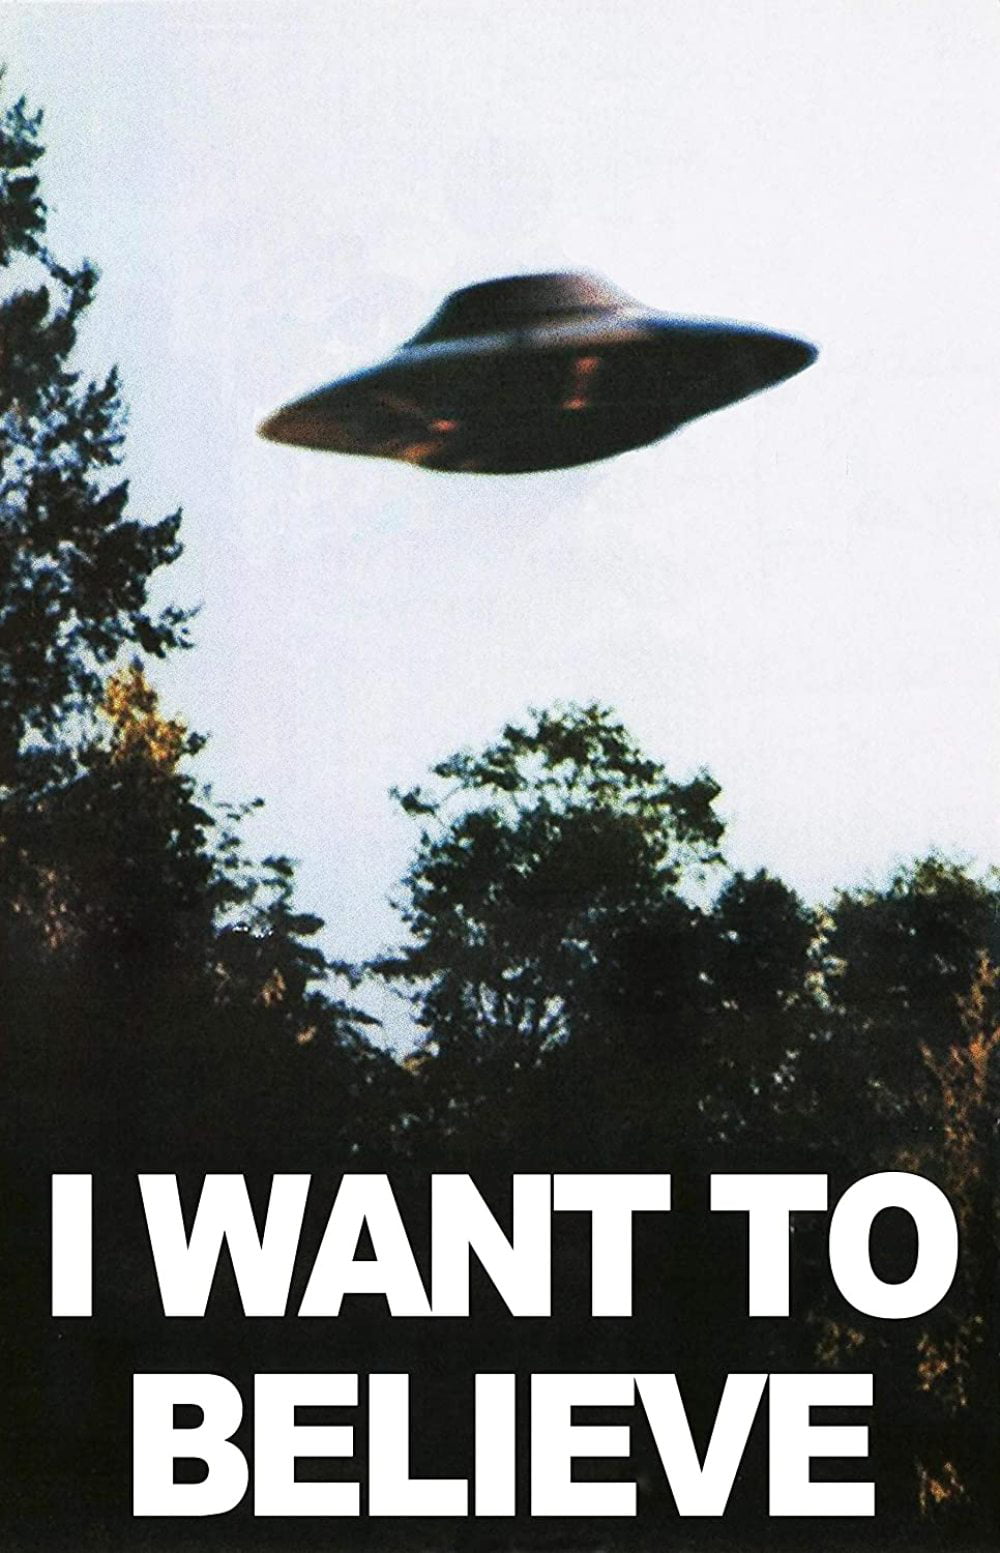 The X Files Fan Art Poster "I Want to Believe" Mulders Office 11 by 17 